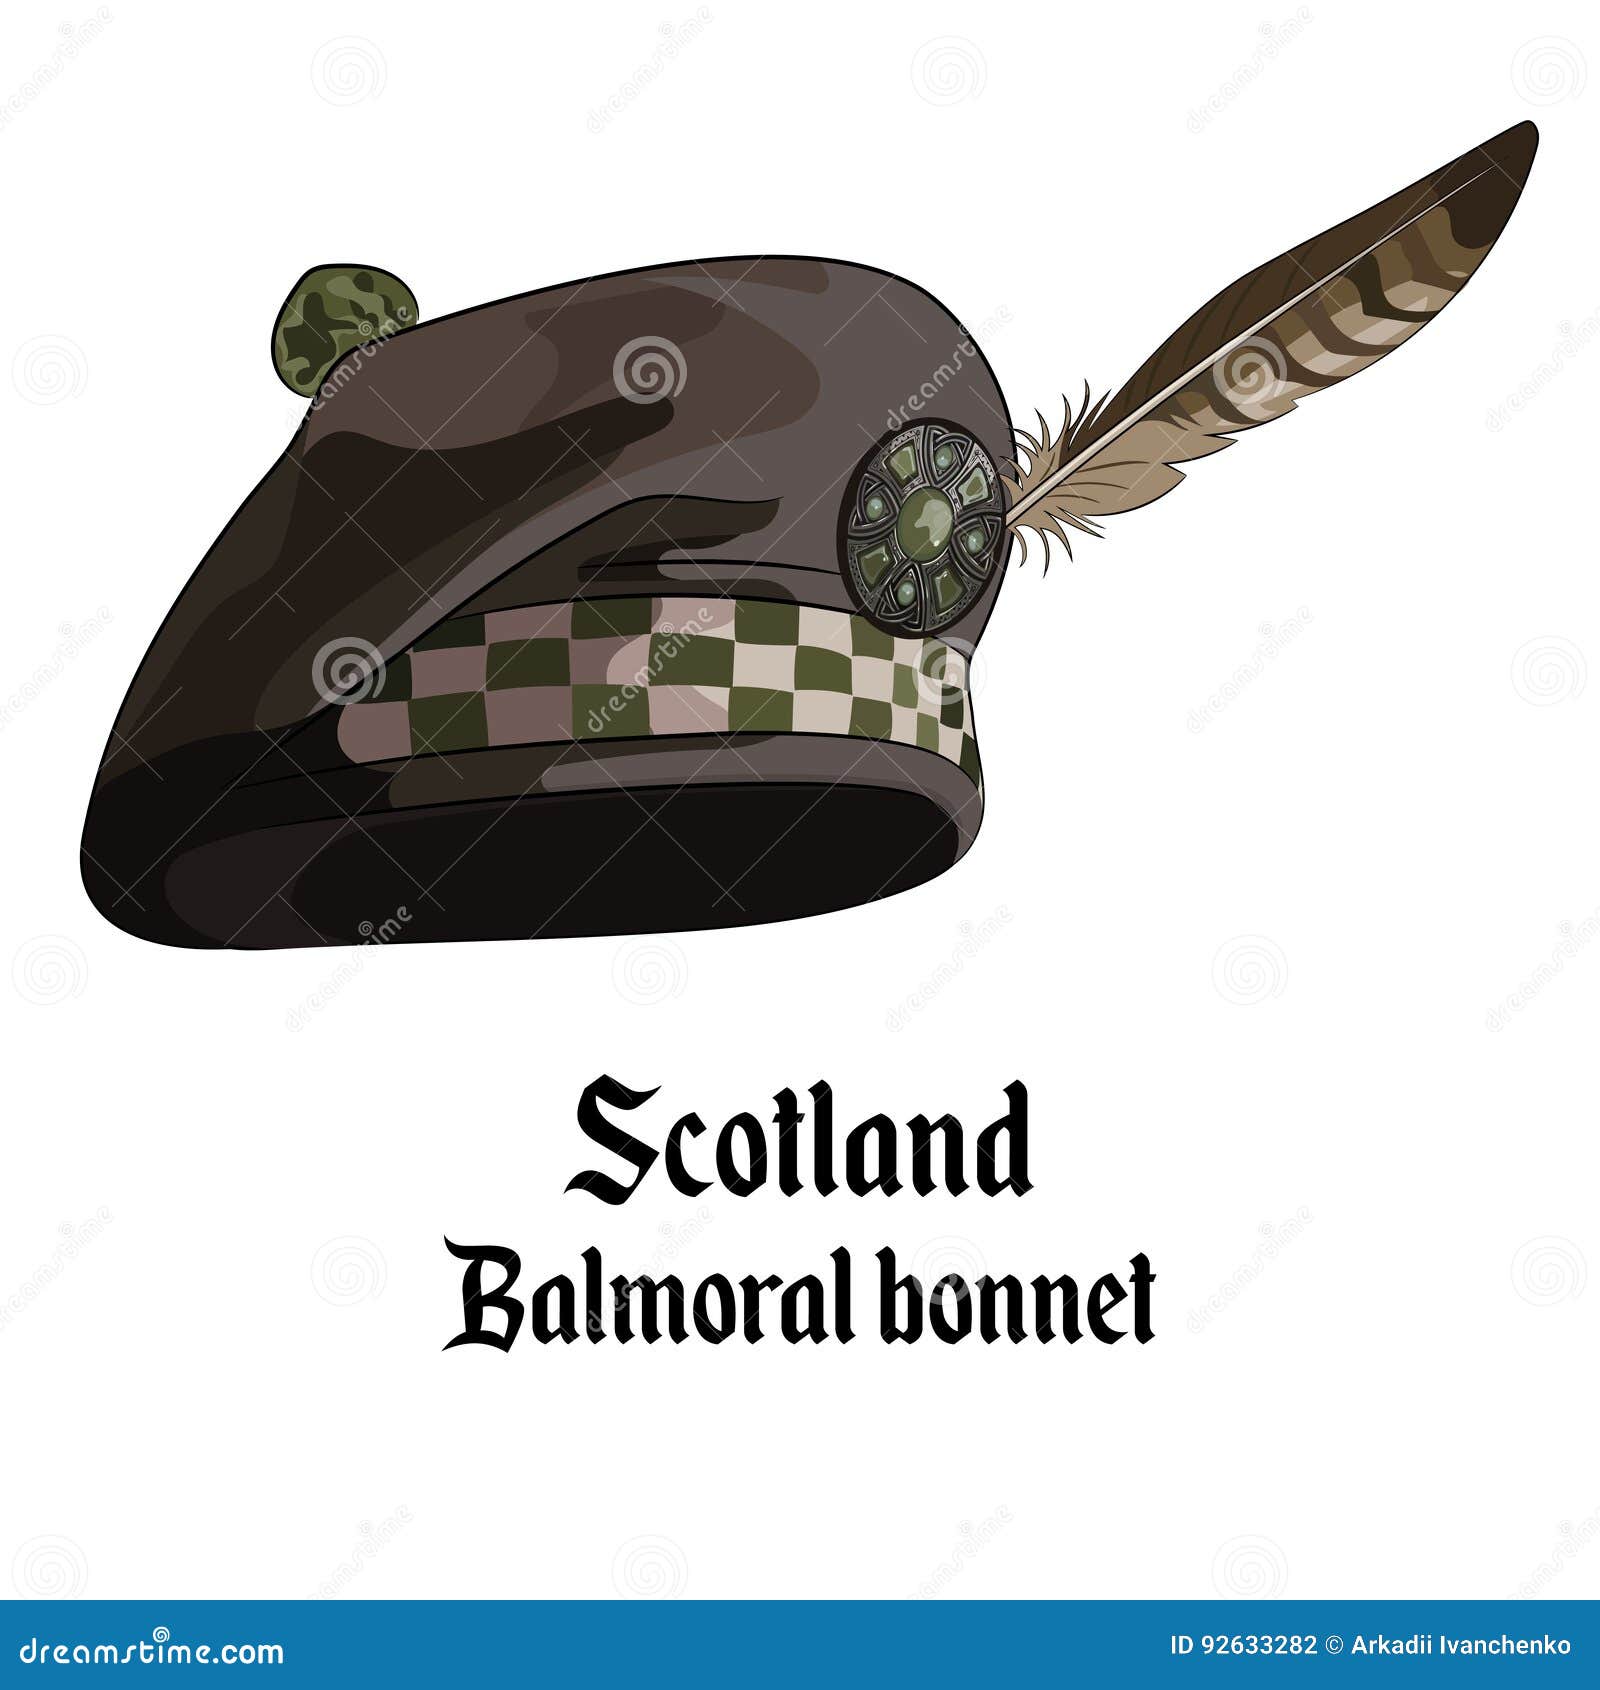 Green trapper cap hat Royalty Free Vector Image